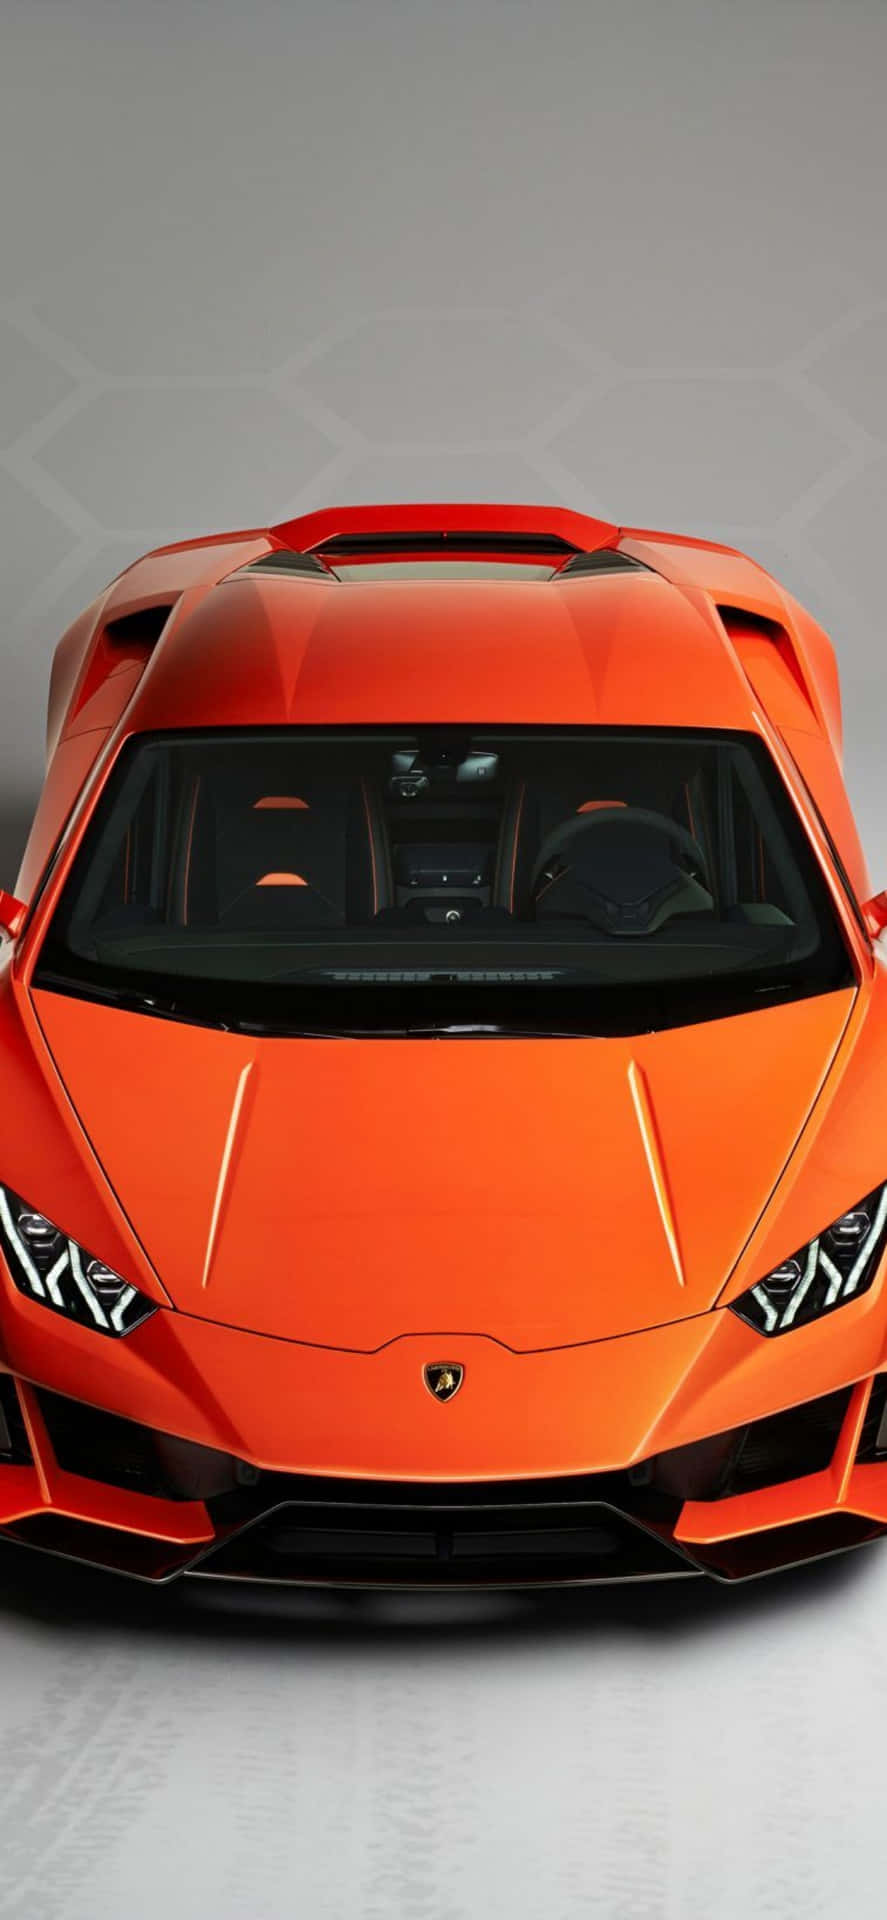 Download The Front Of An Orange Sports Car | Wallpapers.com